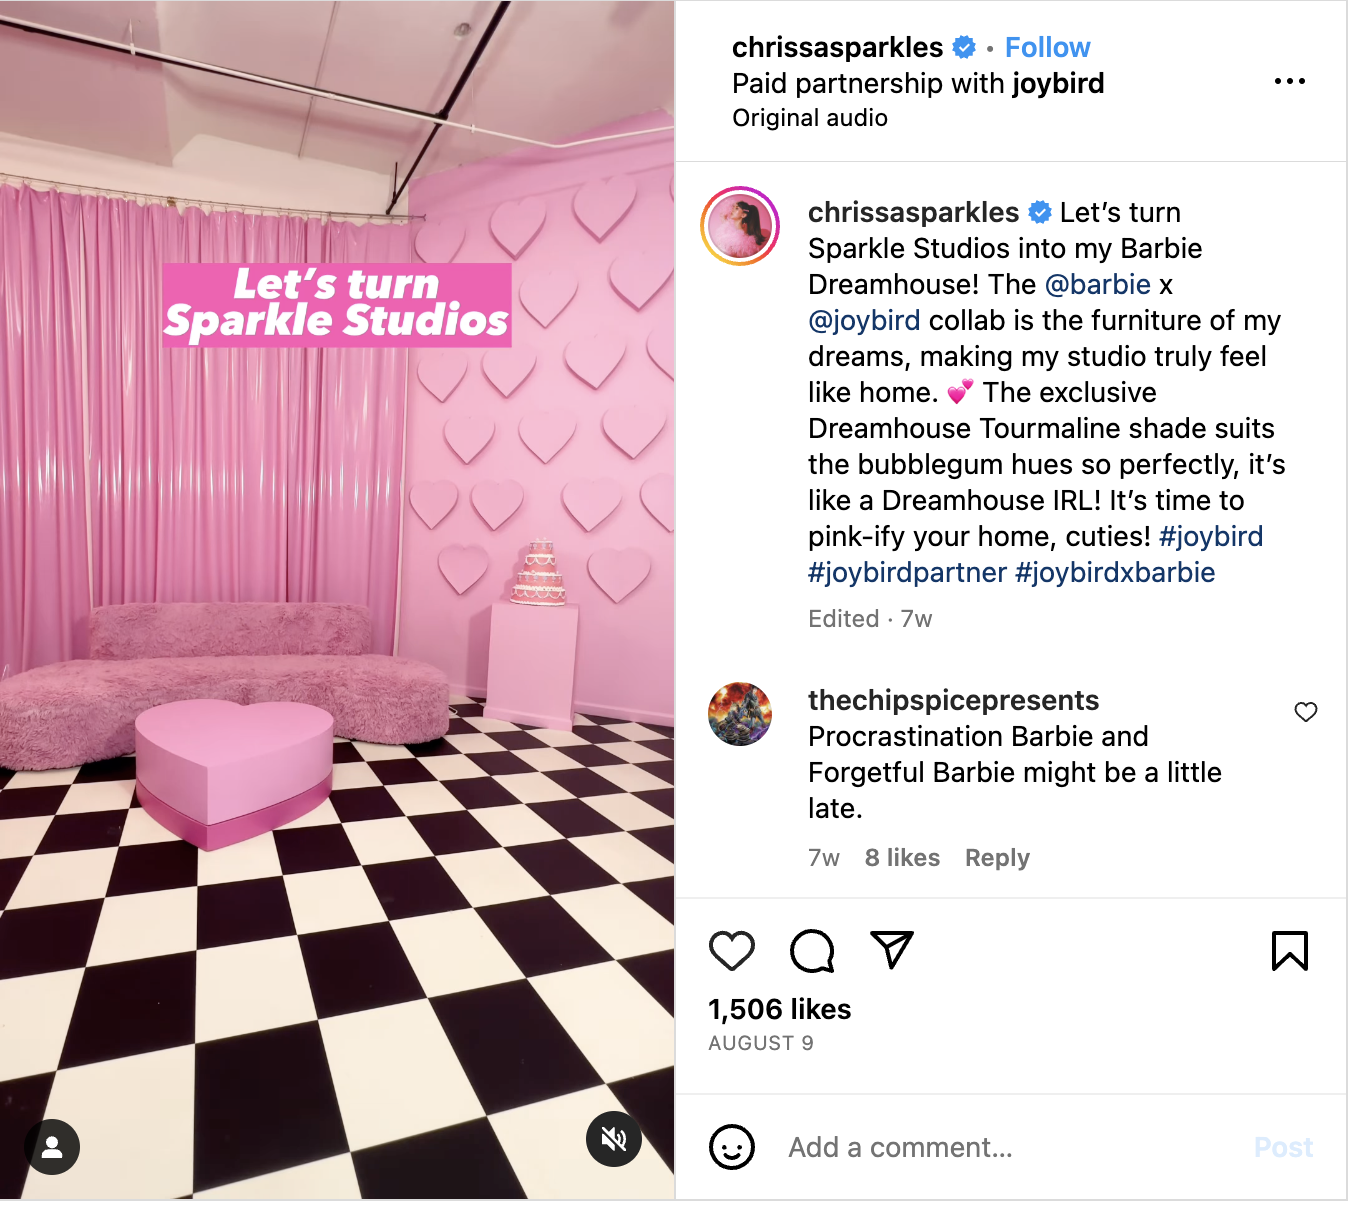 @ChrissaSparkles' Instragram Reel where she transforms her studio into a Barbie Dreamhouse for her collaboration with Joybird.